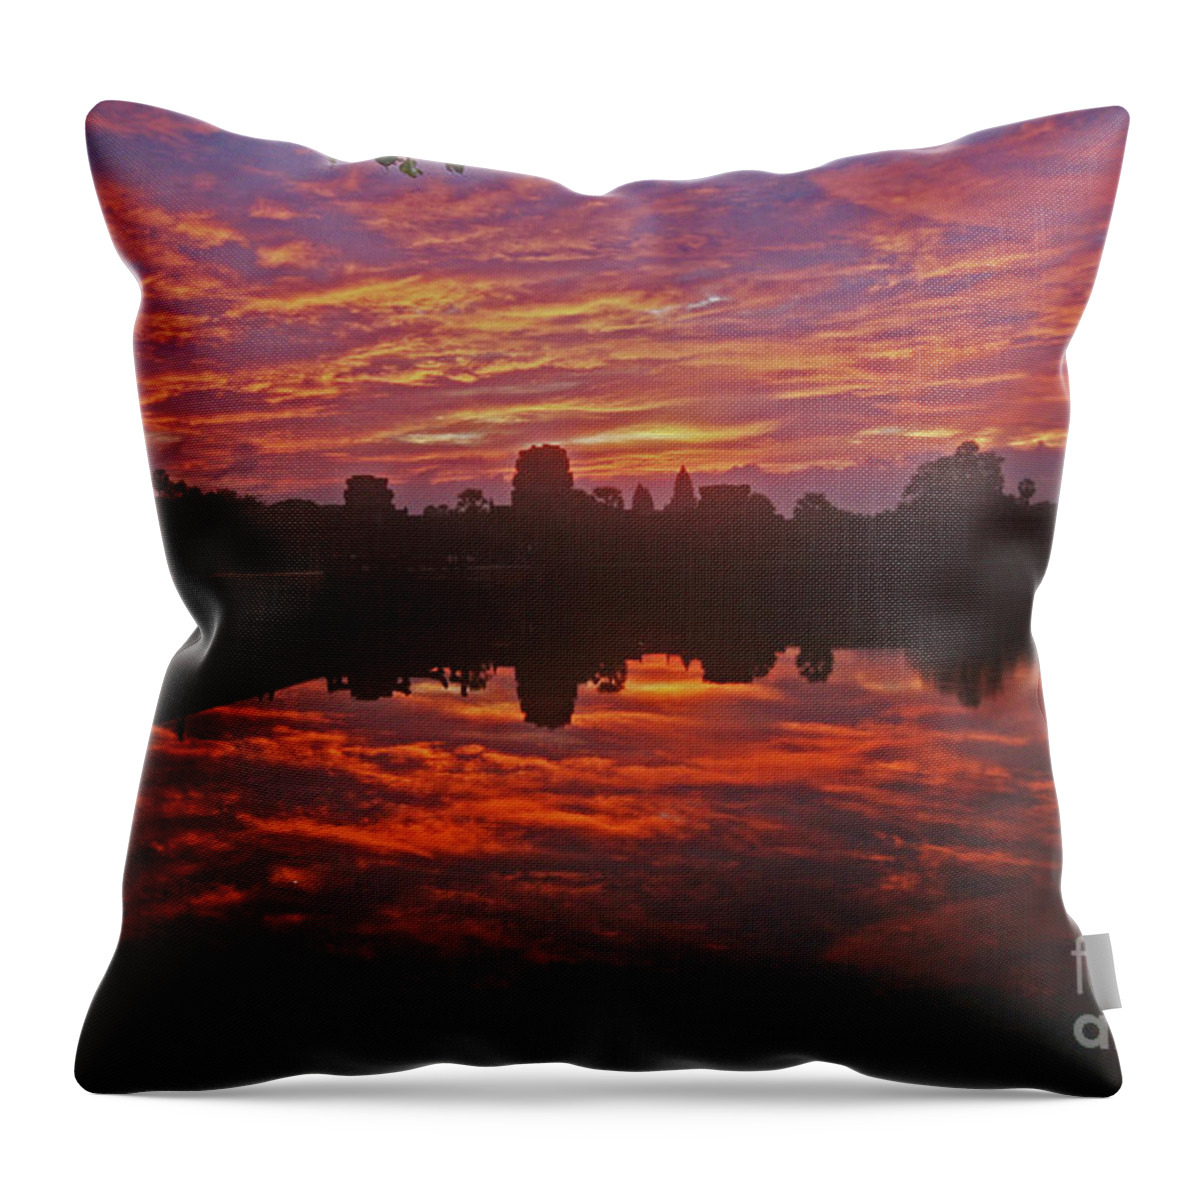  Throw Pillow featuring the digital art Angkor Wat  Siem Reap Cambodia by Darcy Dietrich